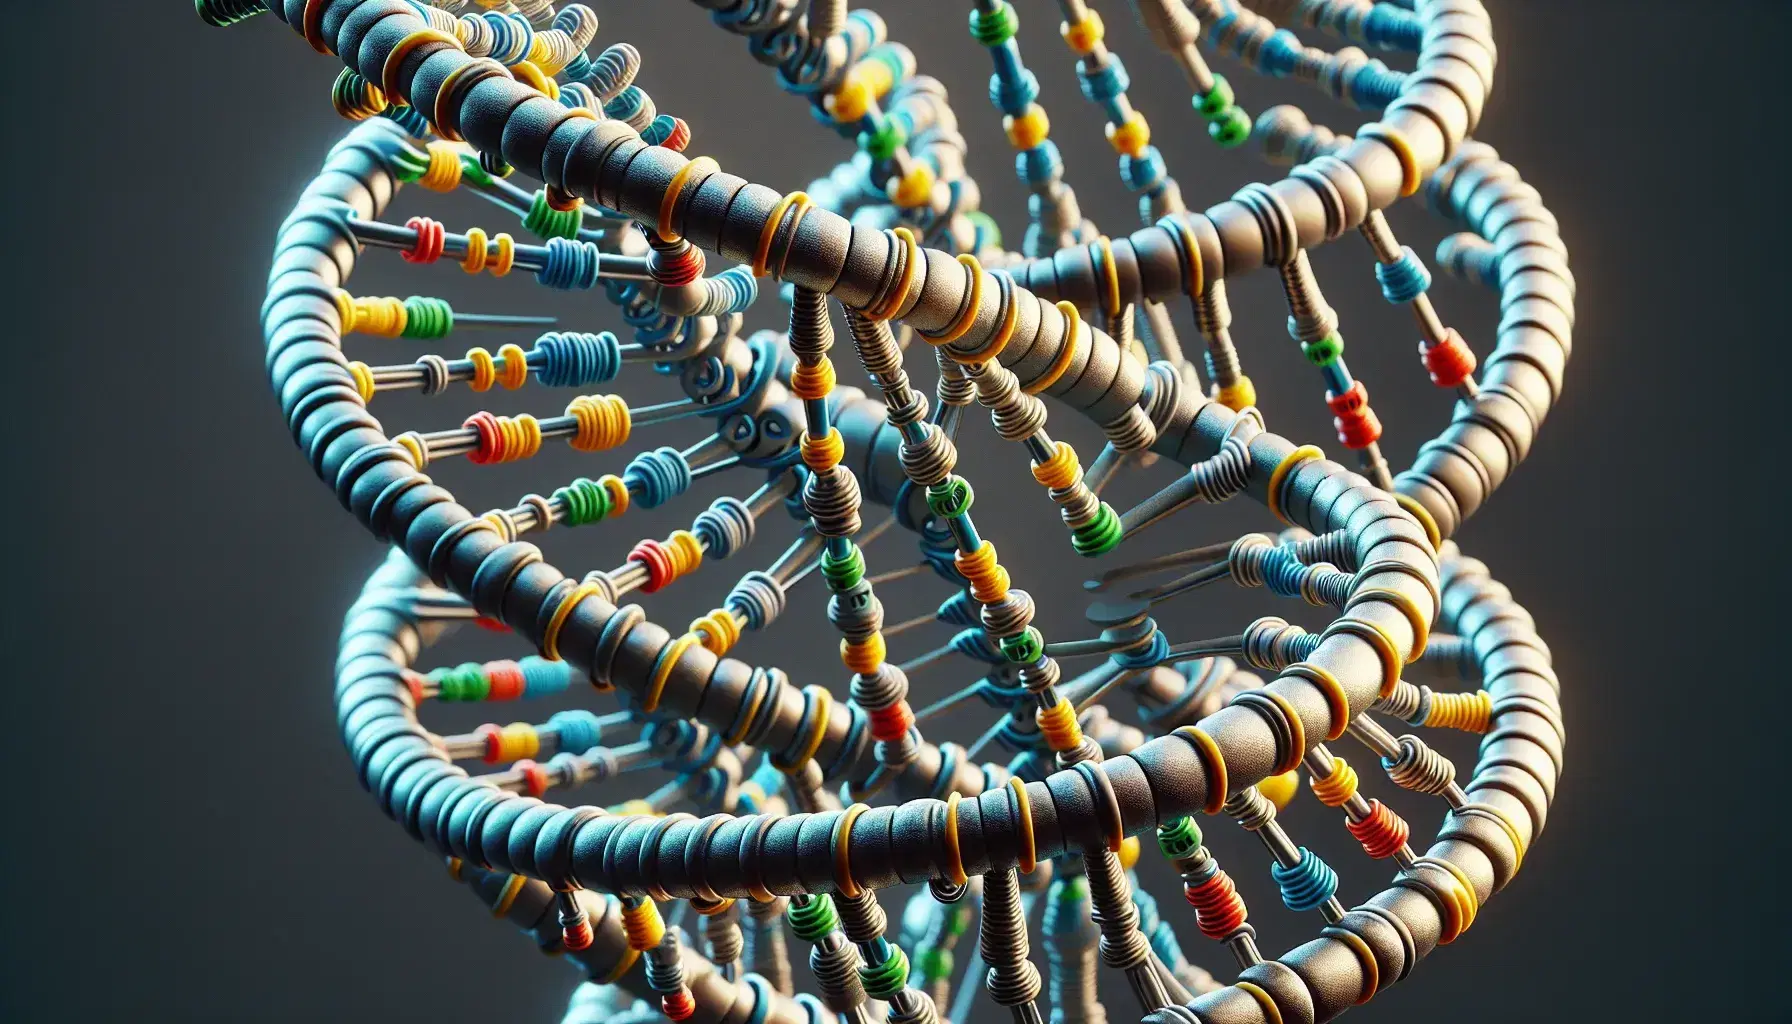 Detailed 3D model of DNA double helix with metallic silver sugar-phosphate backbone and color-coded bases: green adenine, red thymine, blue cytosine, yellow guanine.